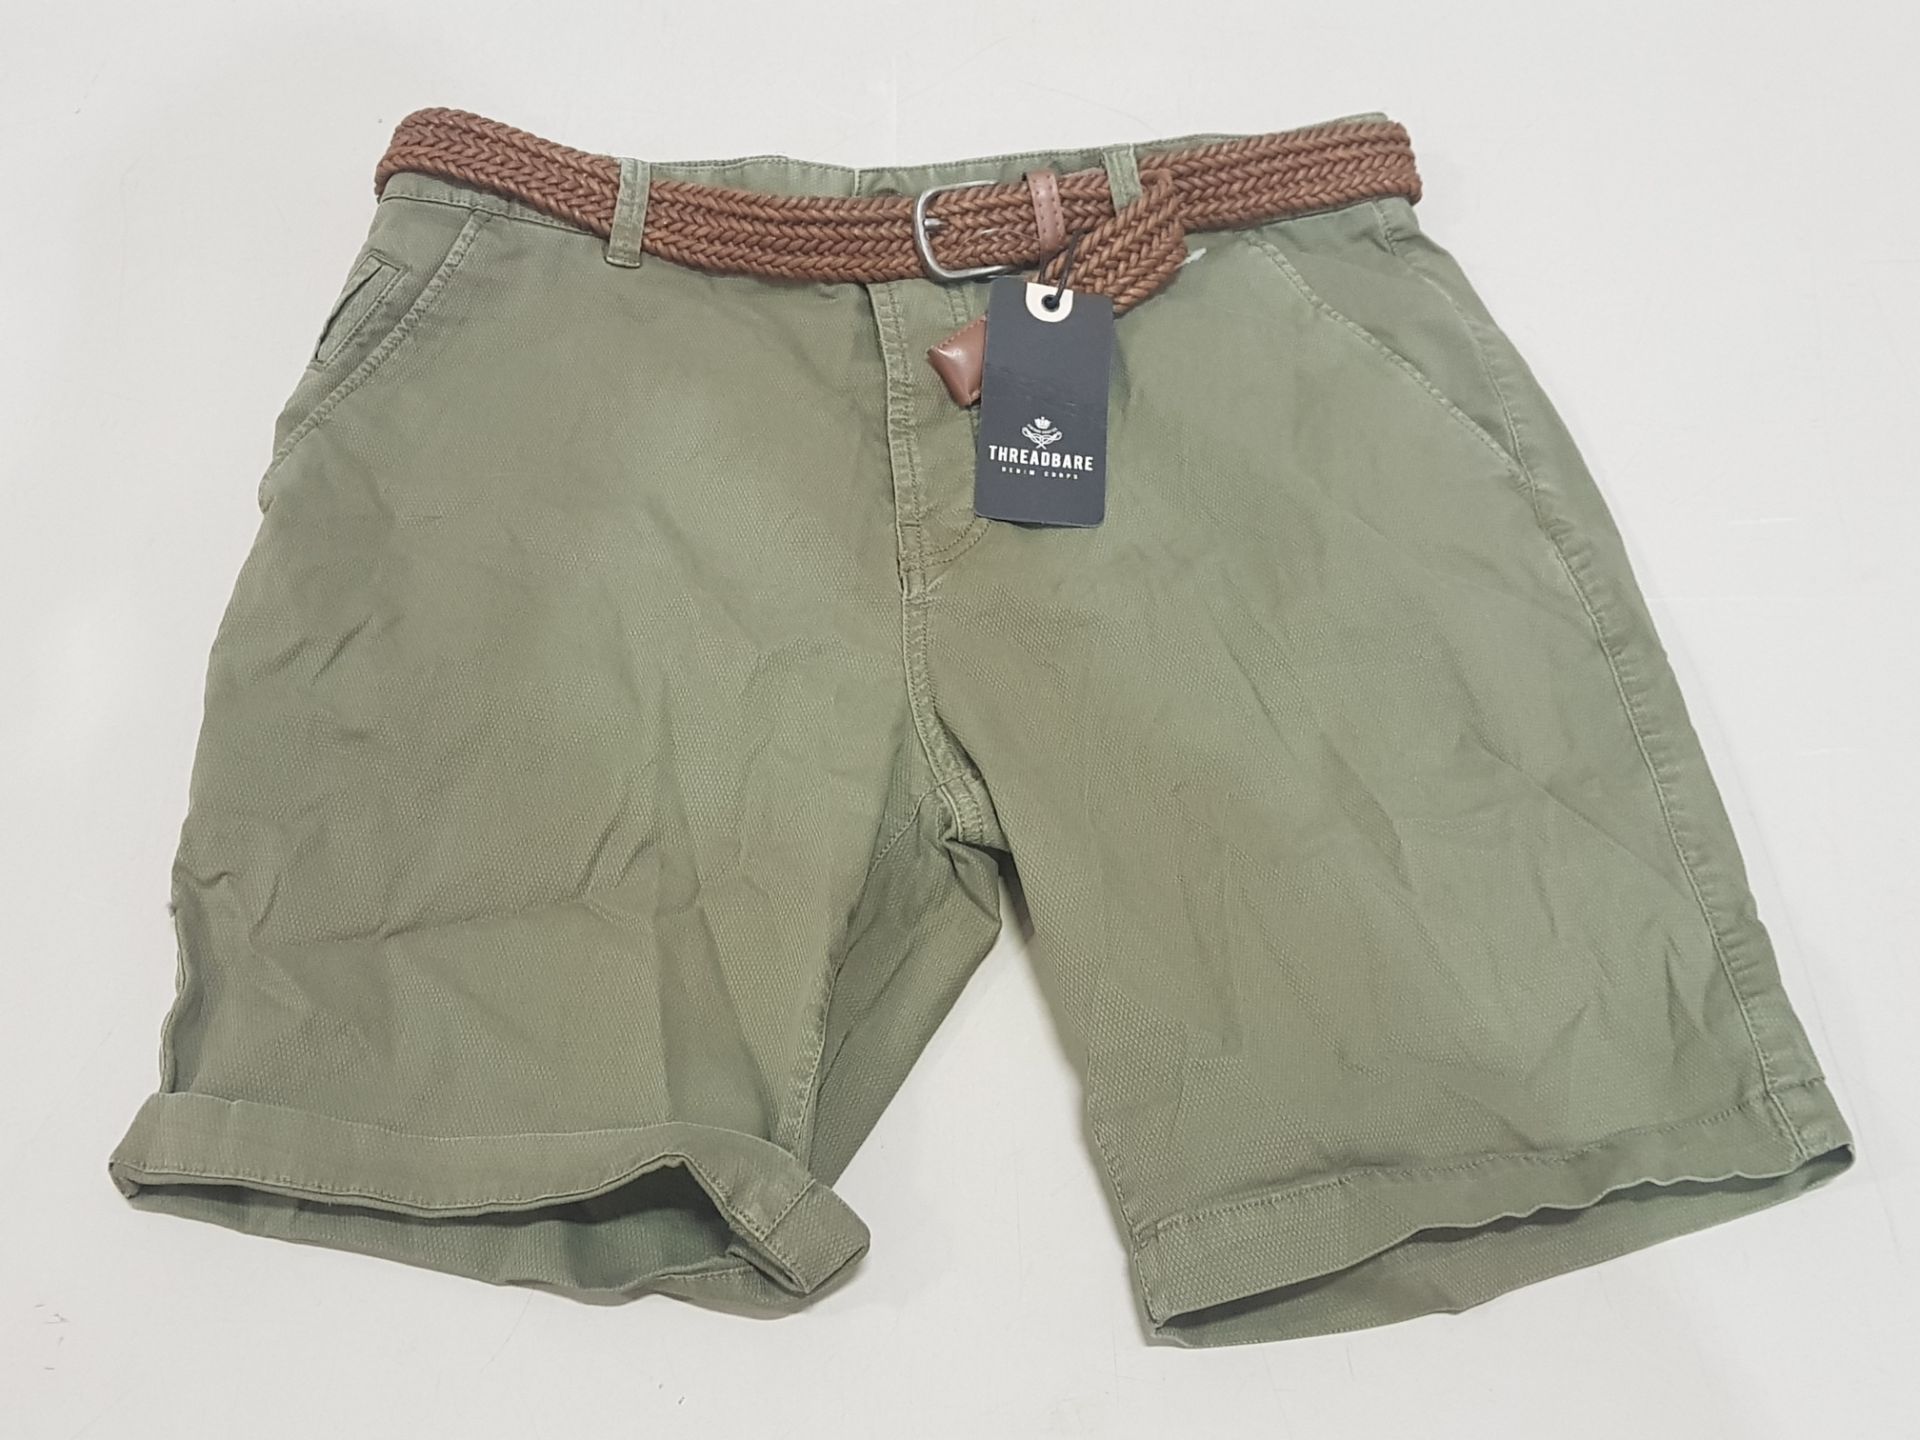 12 X BRAND NEW THREADBARE CHINO SHORT'S WITH BELT IN GREEN SIZES 3 IN SIZE 30 , 8 IN SIZE 34 , 1